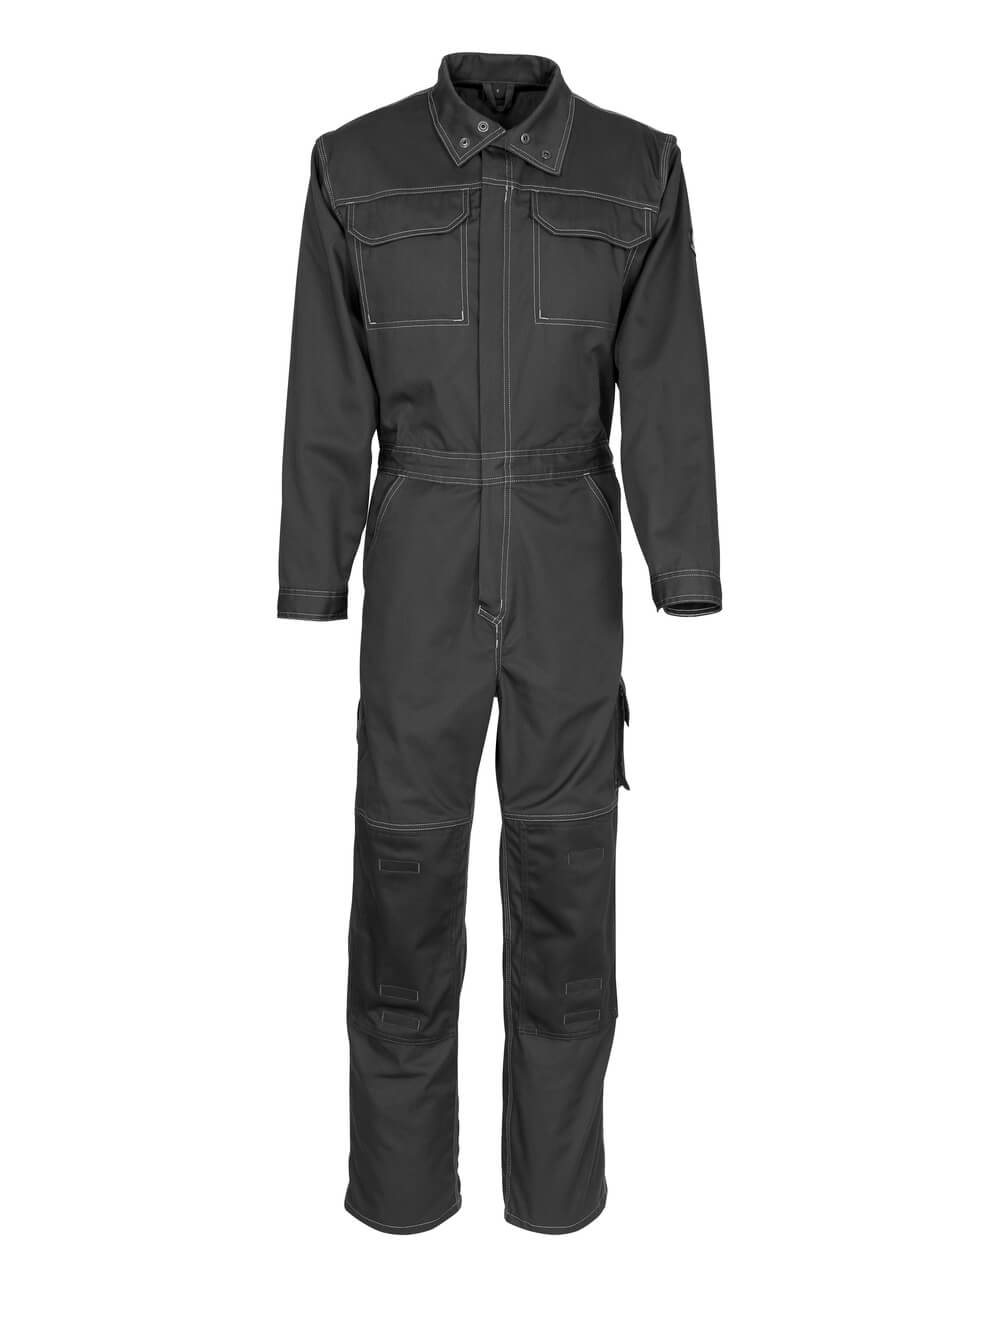 MASCOT®INDUSTRY Boilersuit with kneepad pockets Danville 12311 - DaltonSafety